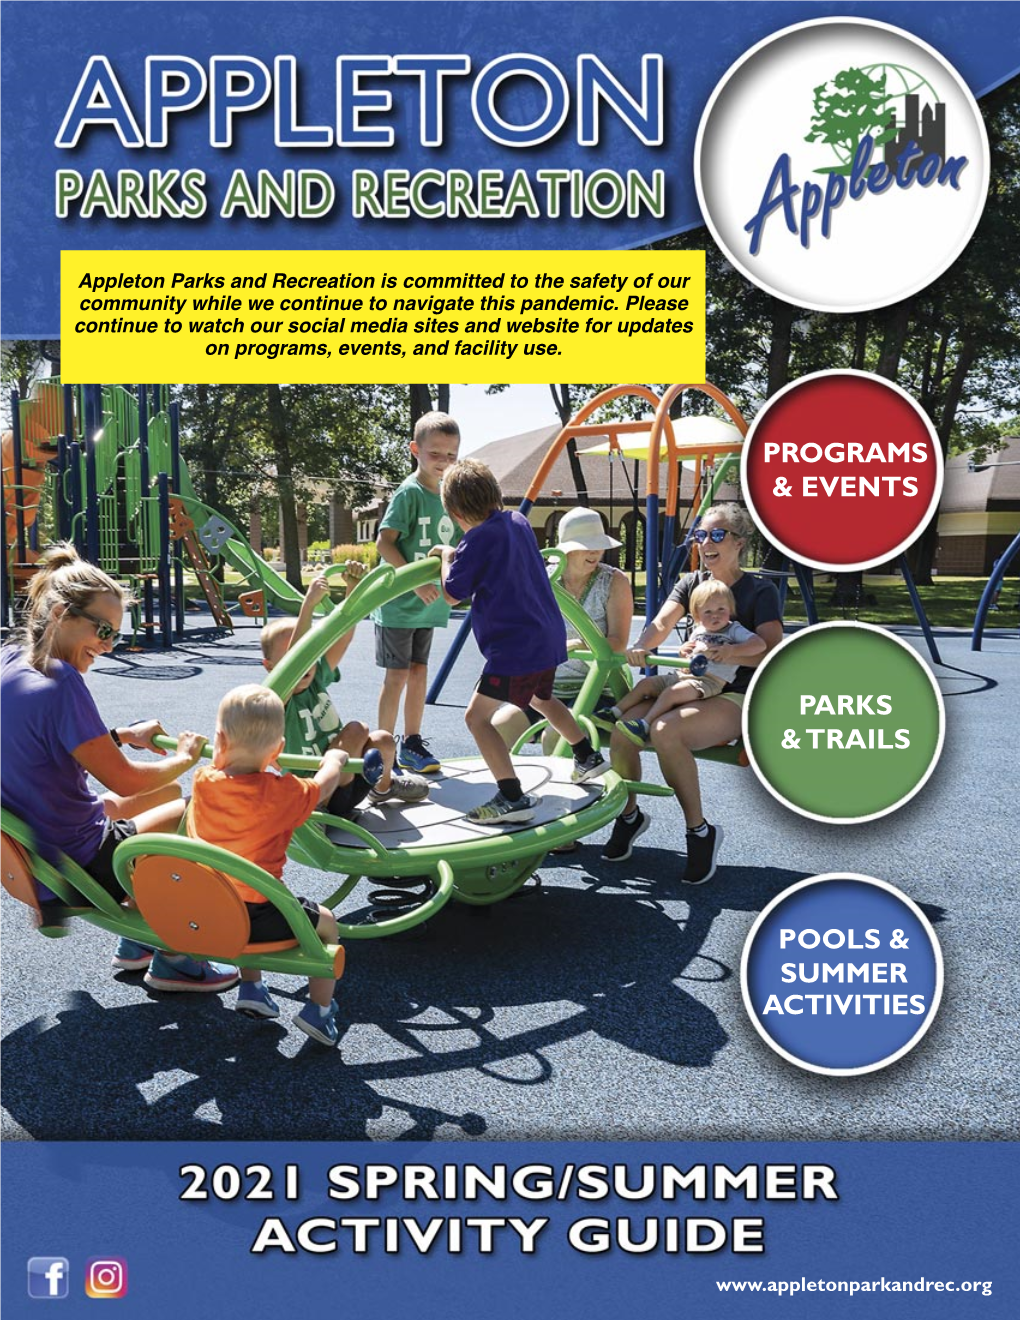 Pools & Summer Activities Parks & Trails Programs